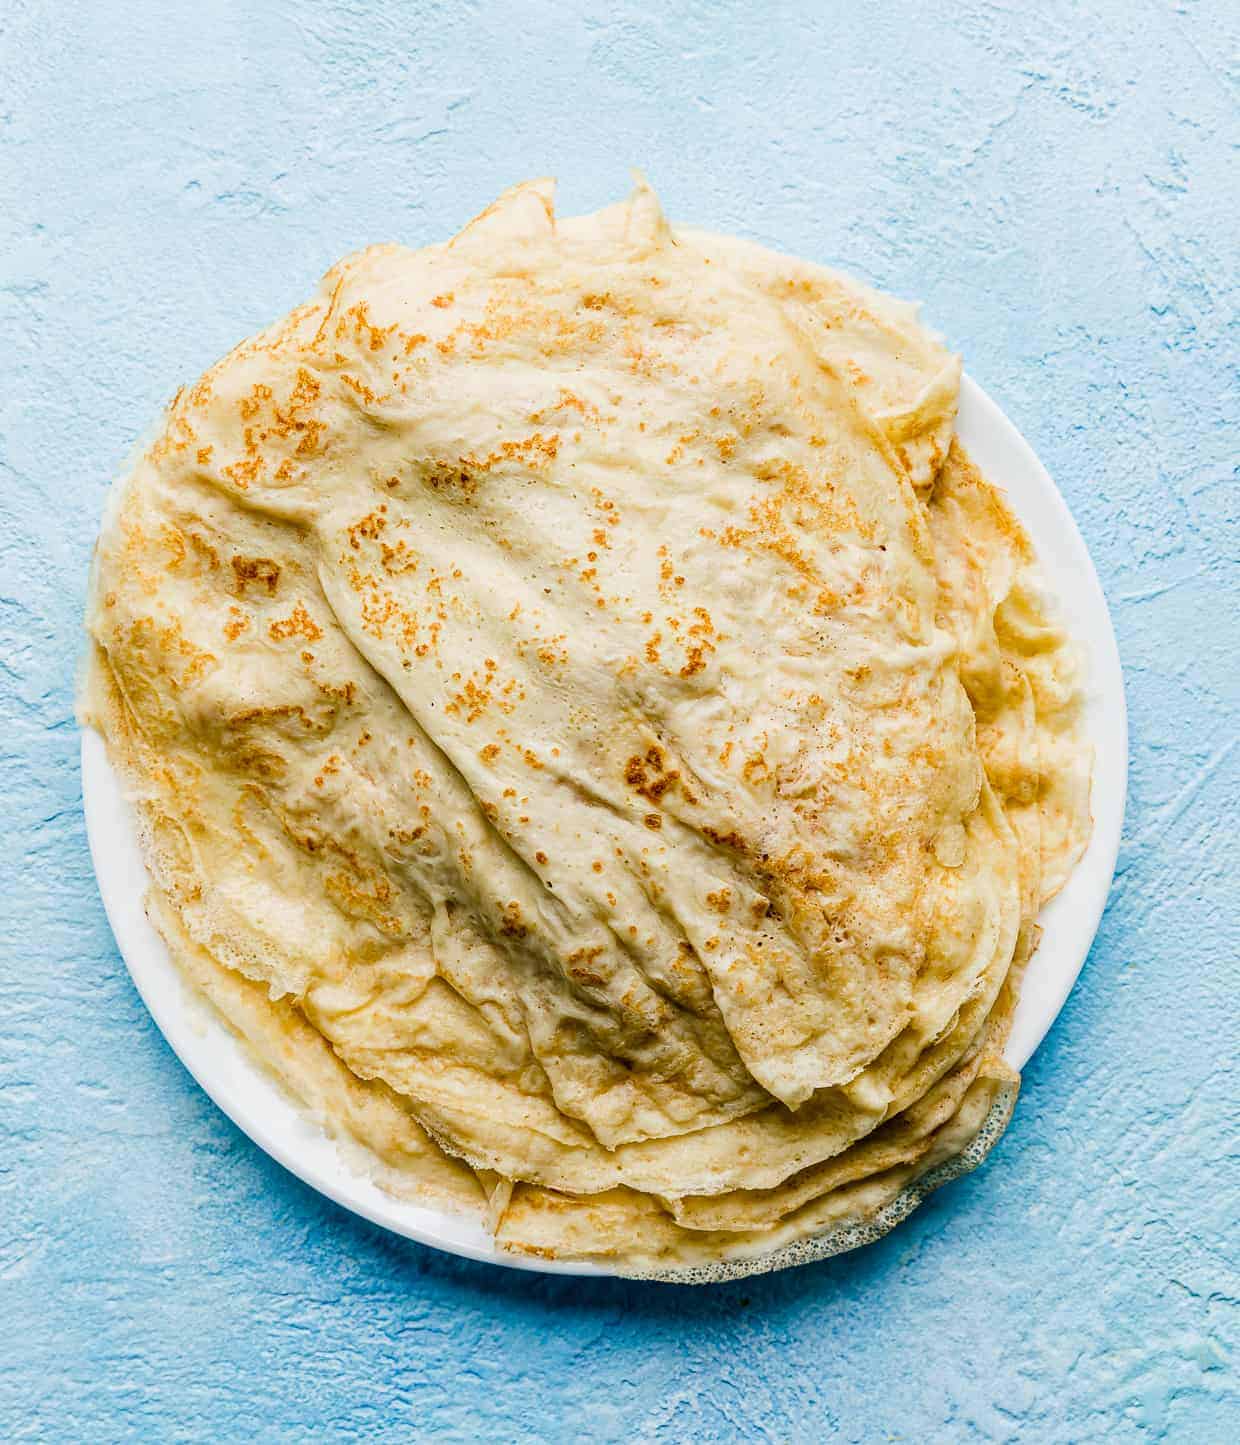 A stack of cooked crepes on a plate on a blue background.